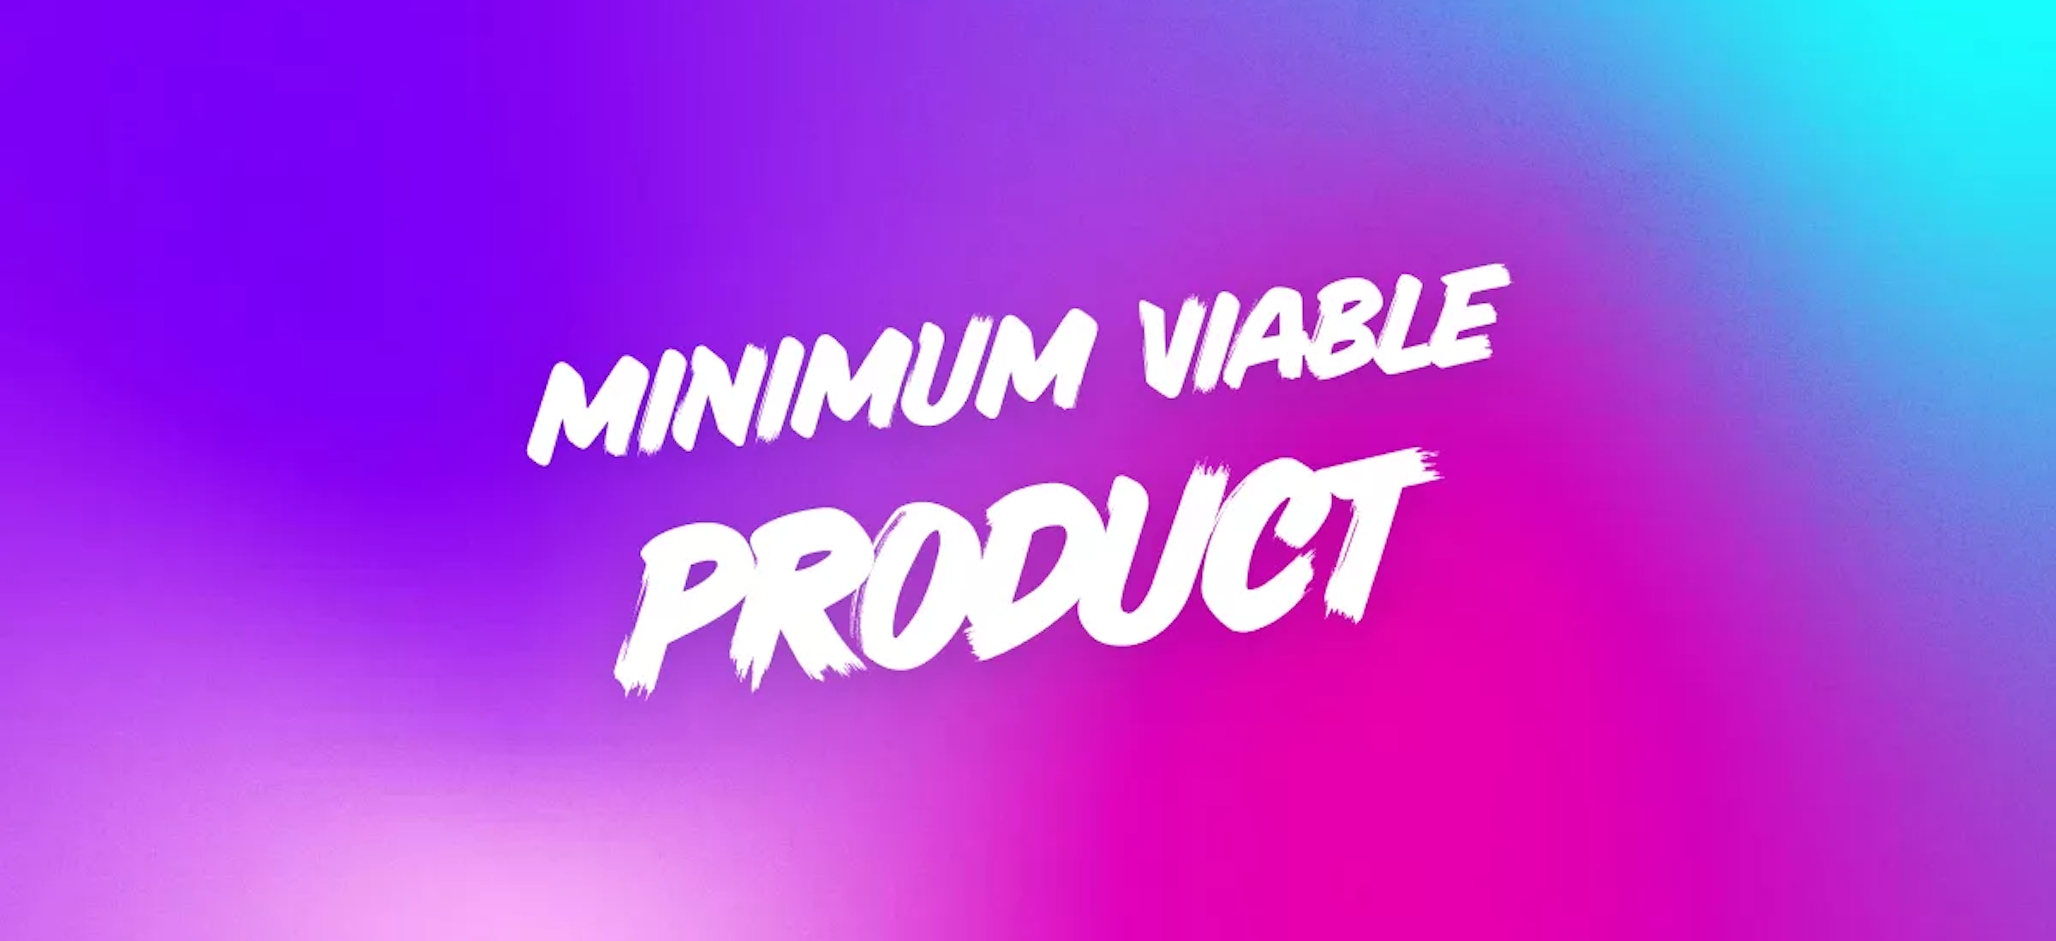 4 essential steps to building a minimum viable product